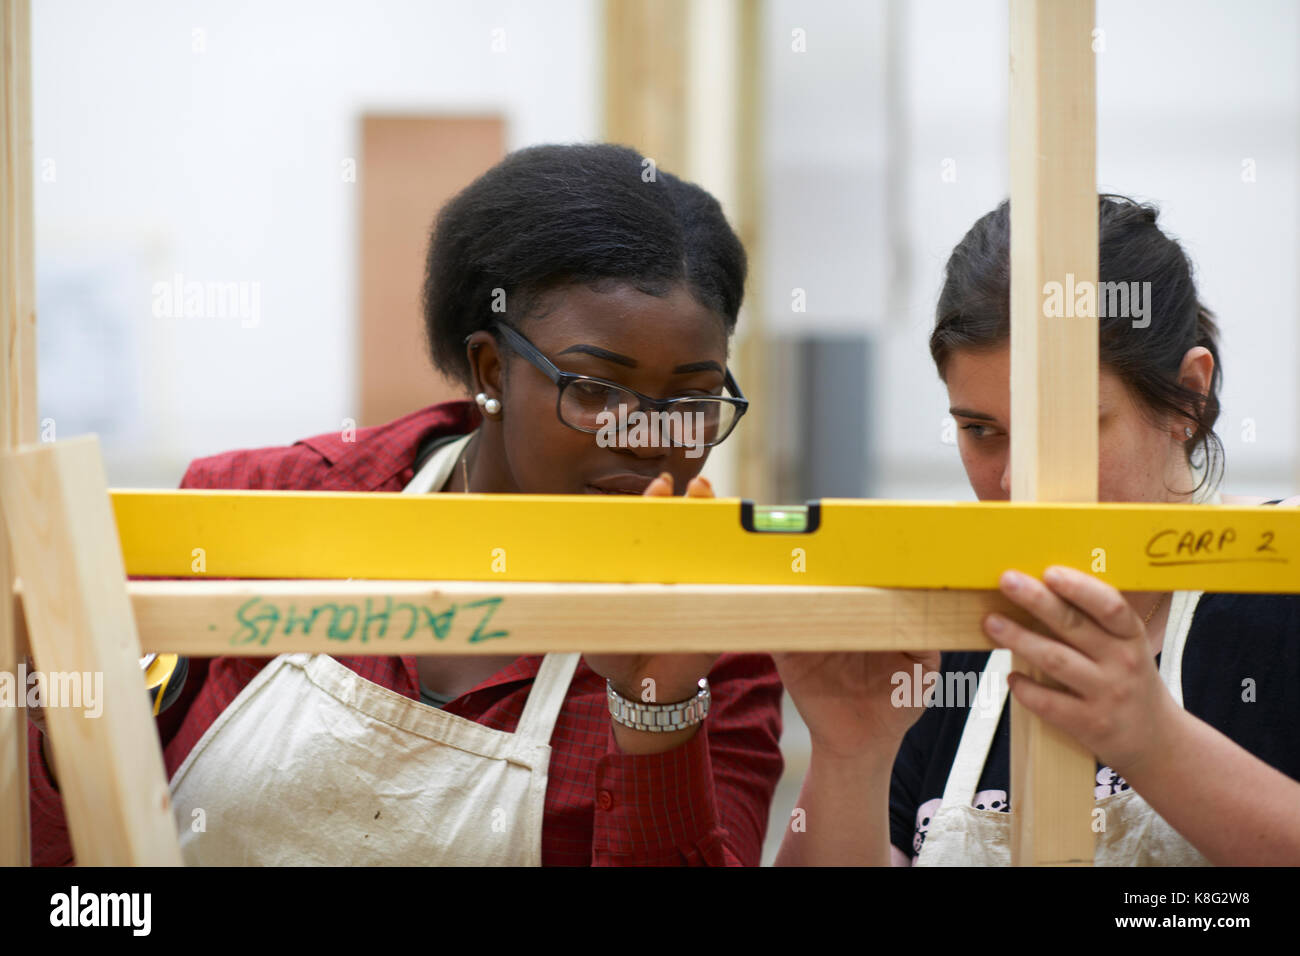 Student learning how to do building work Stock Photo